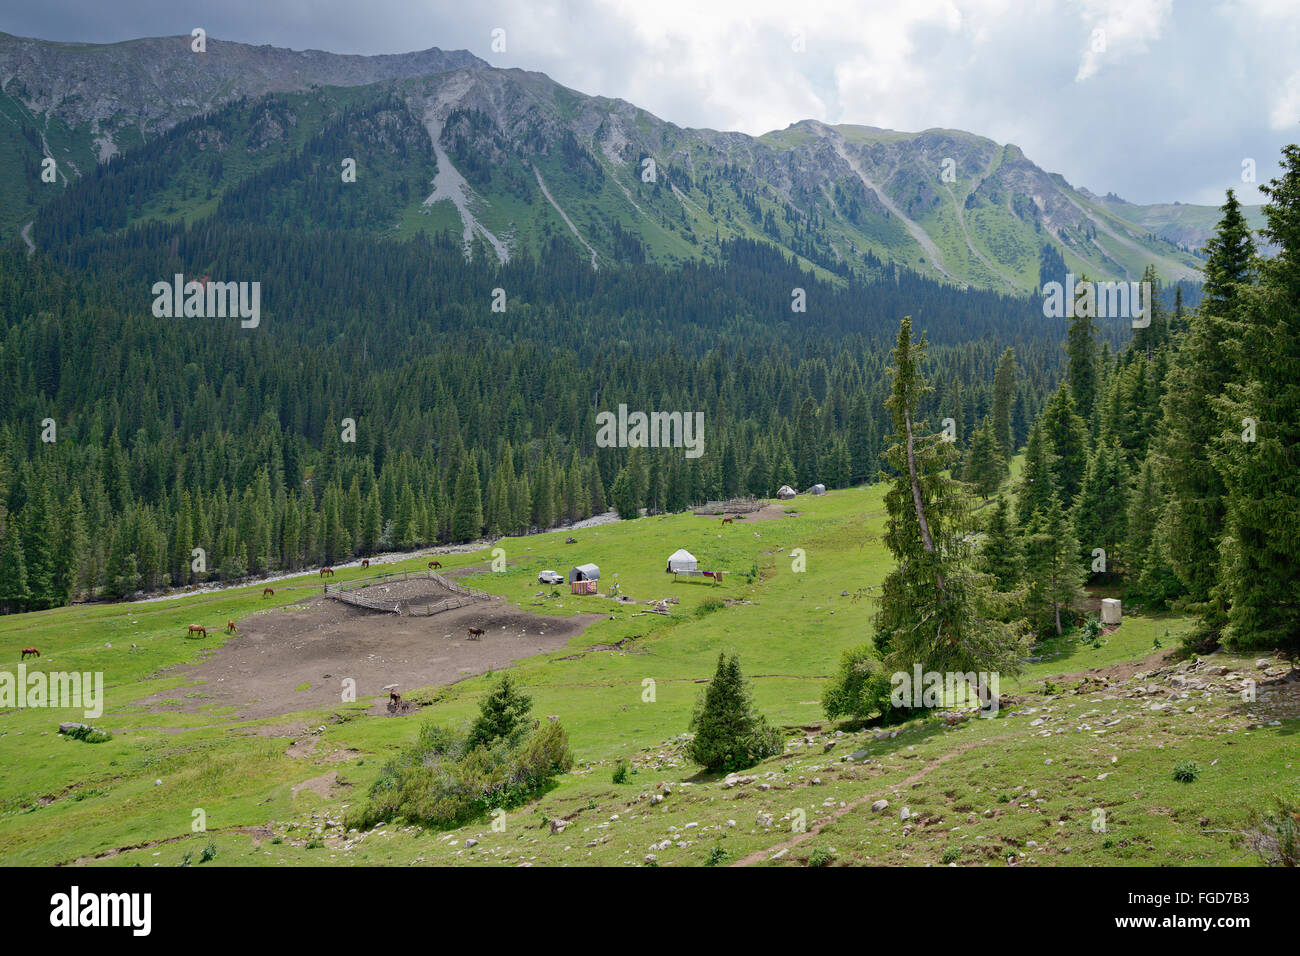 Yurt (a felted nomad tent) at summer pasture in Tian Shan mountain range, Kyrgyzstan. Stock Photo